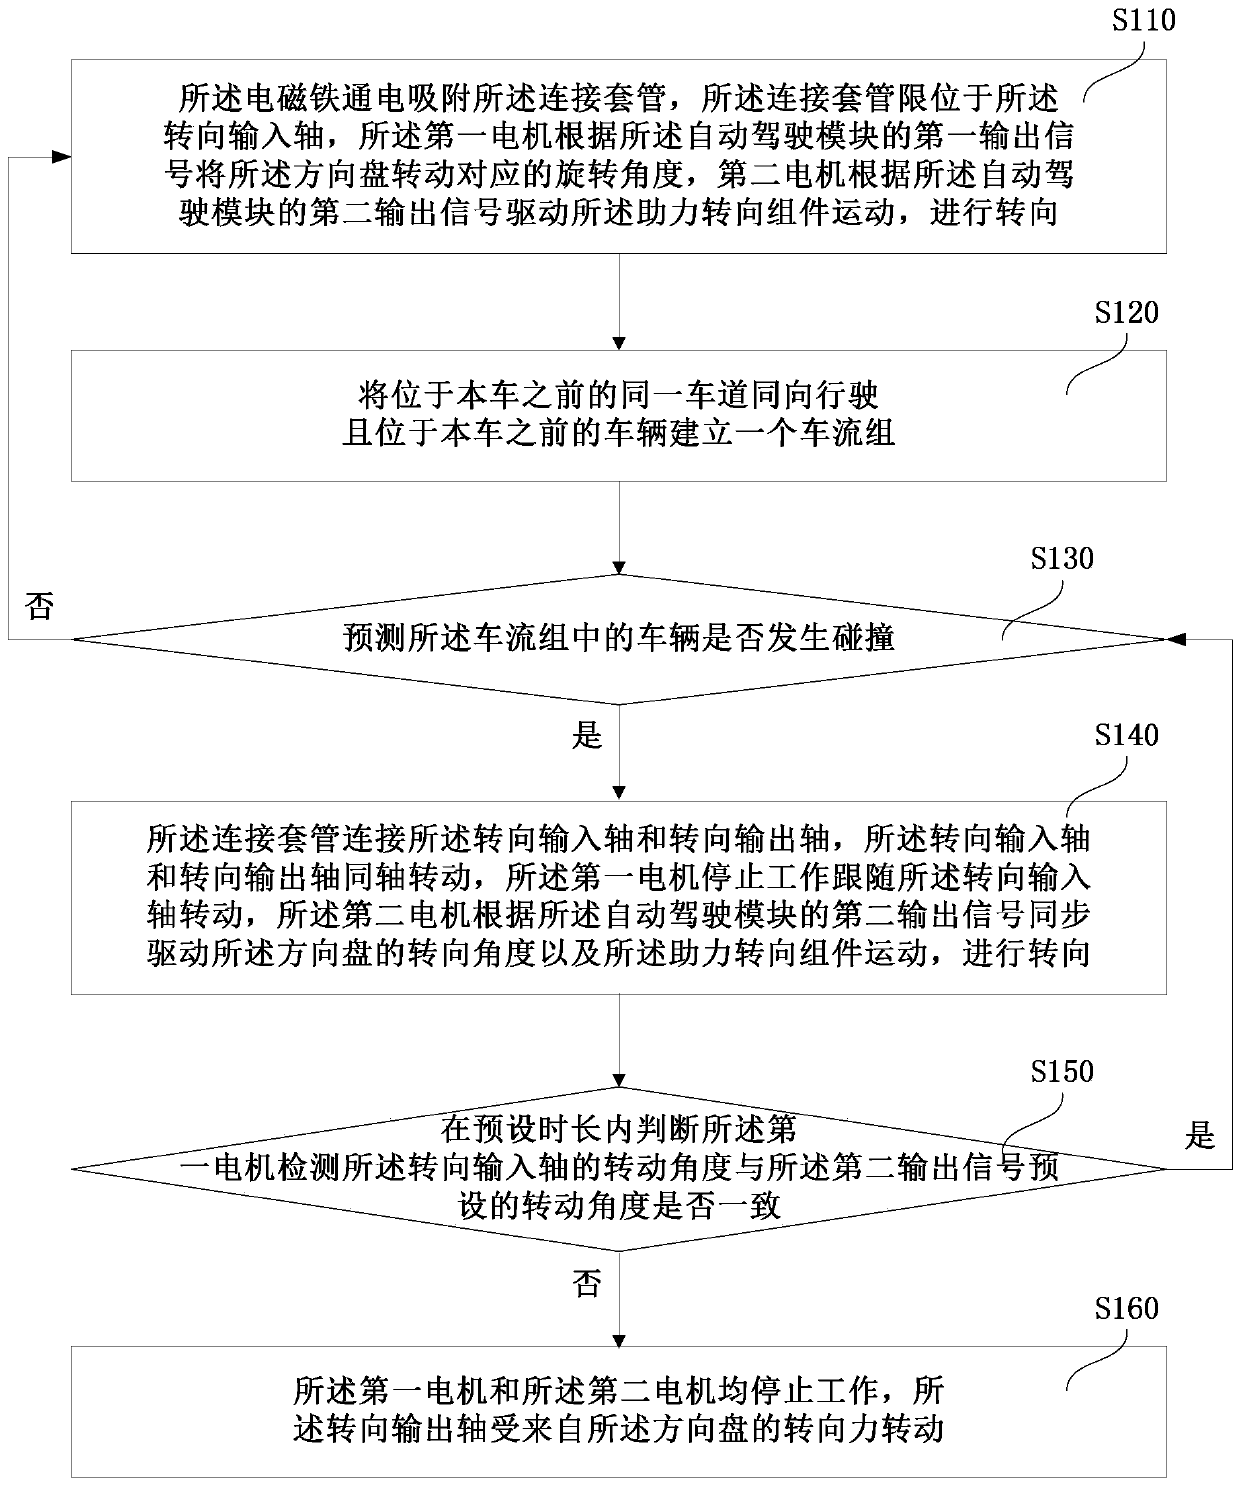 Driving mode switching system, method and device for automatic driving, and storage medium